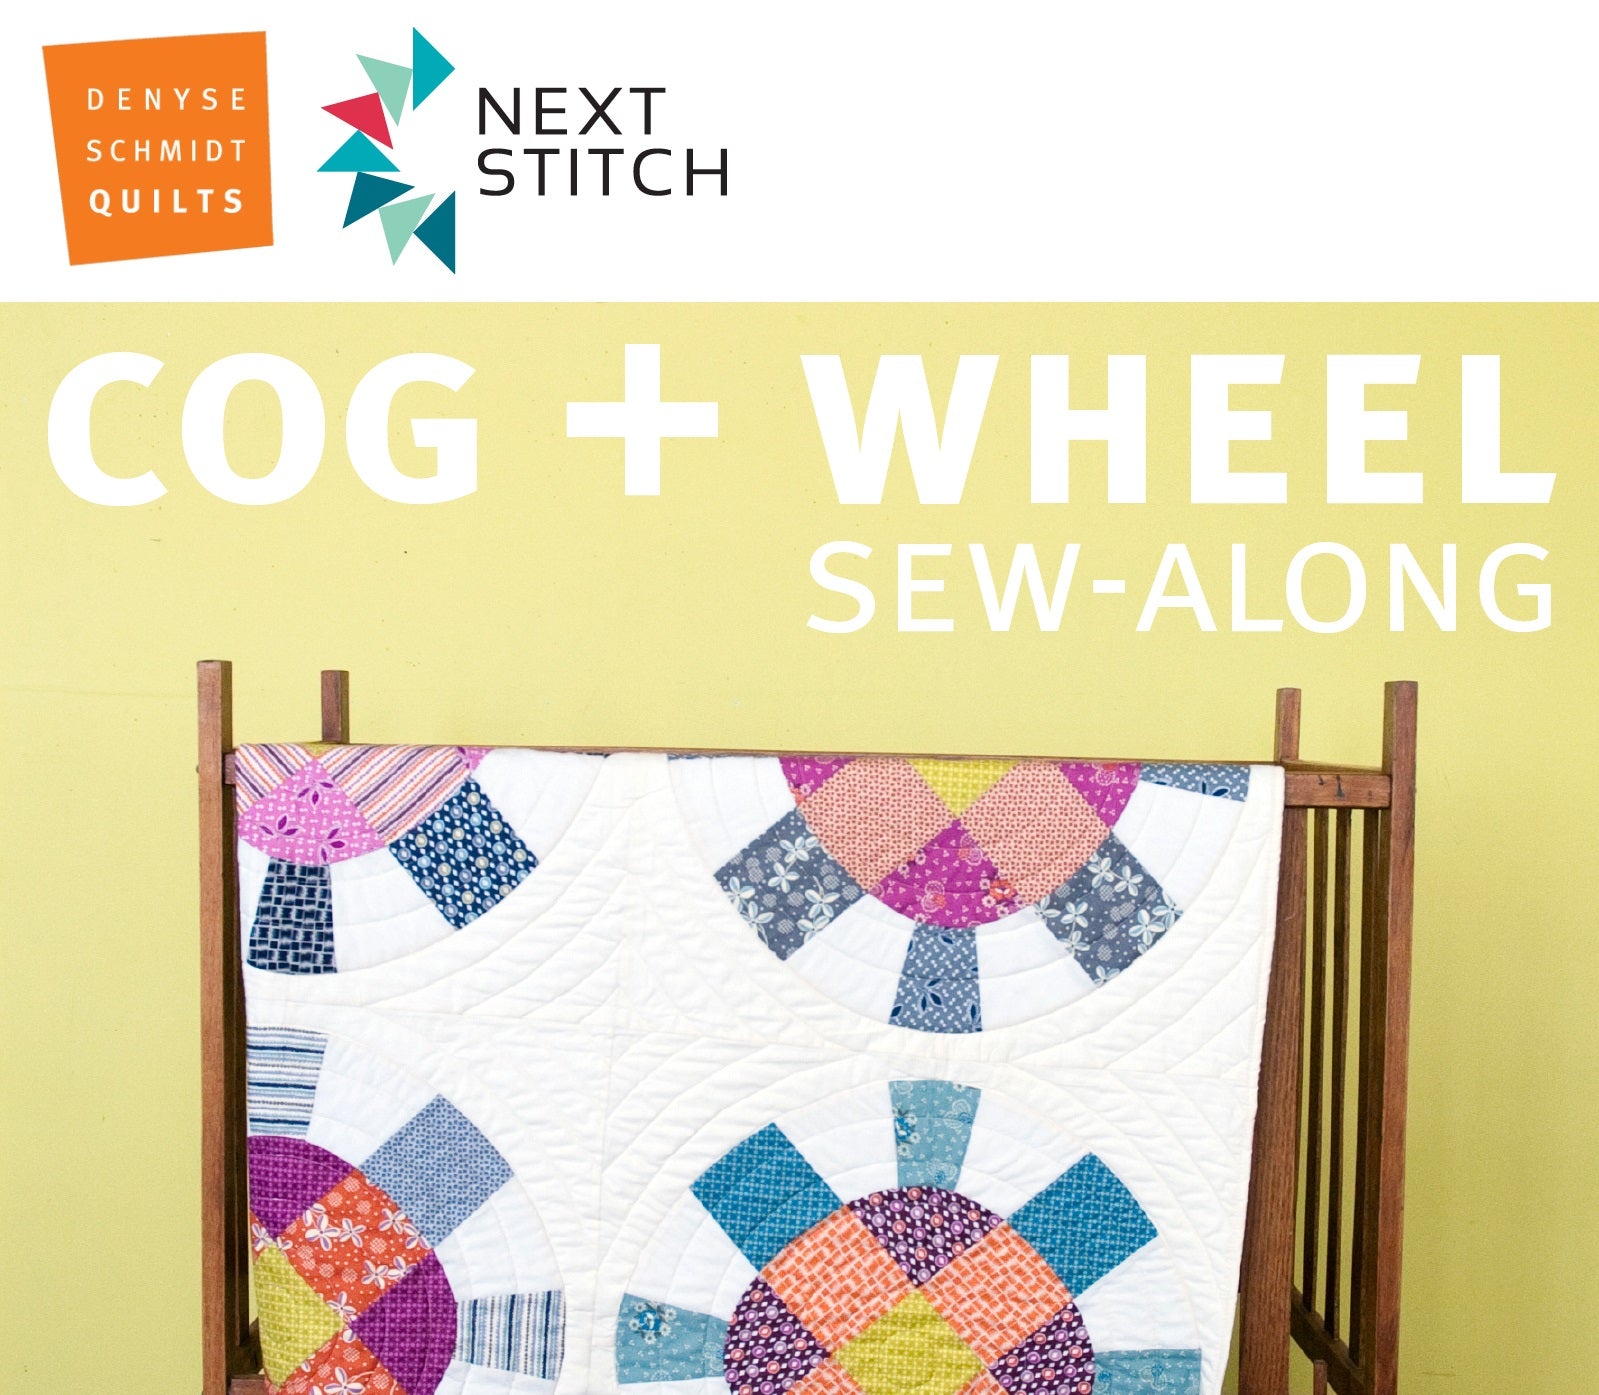 Announcing the Cog and Wheel Sew-along 2019